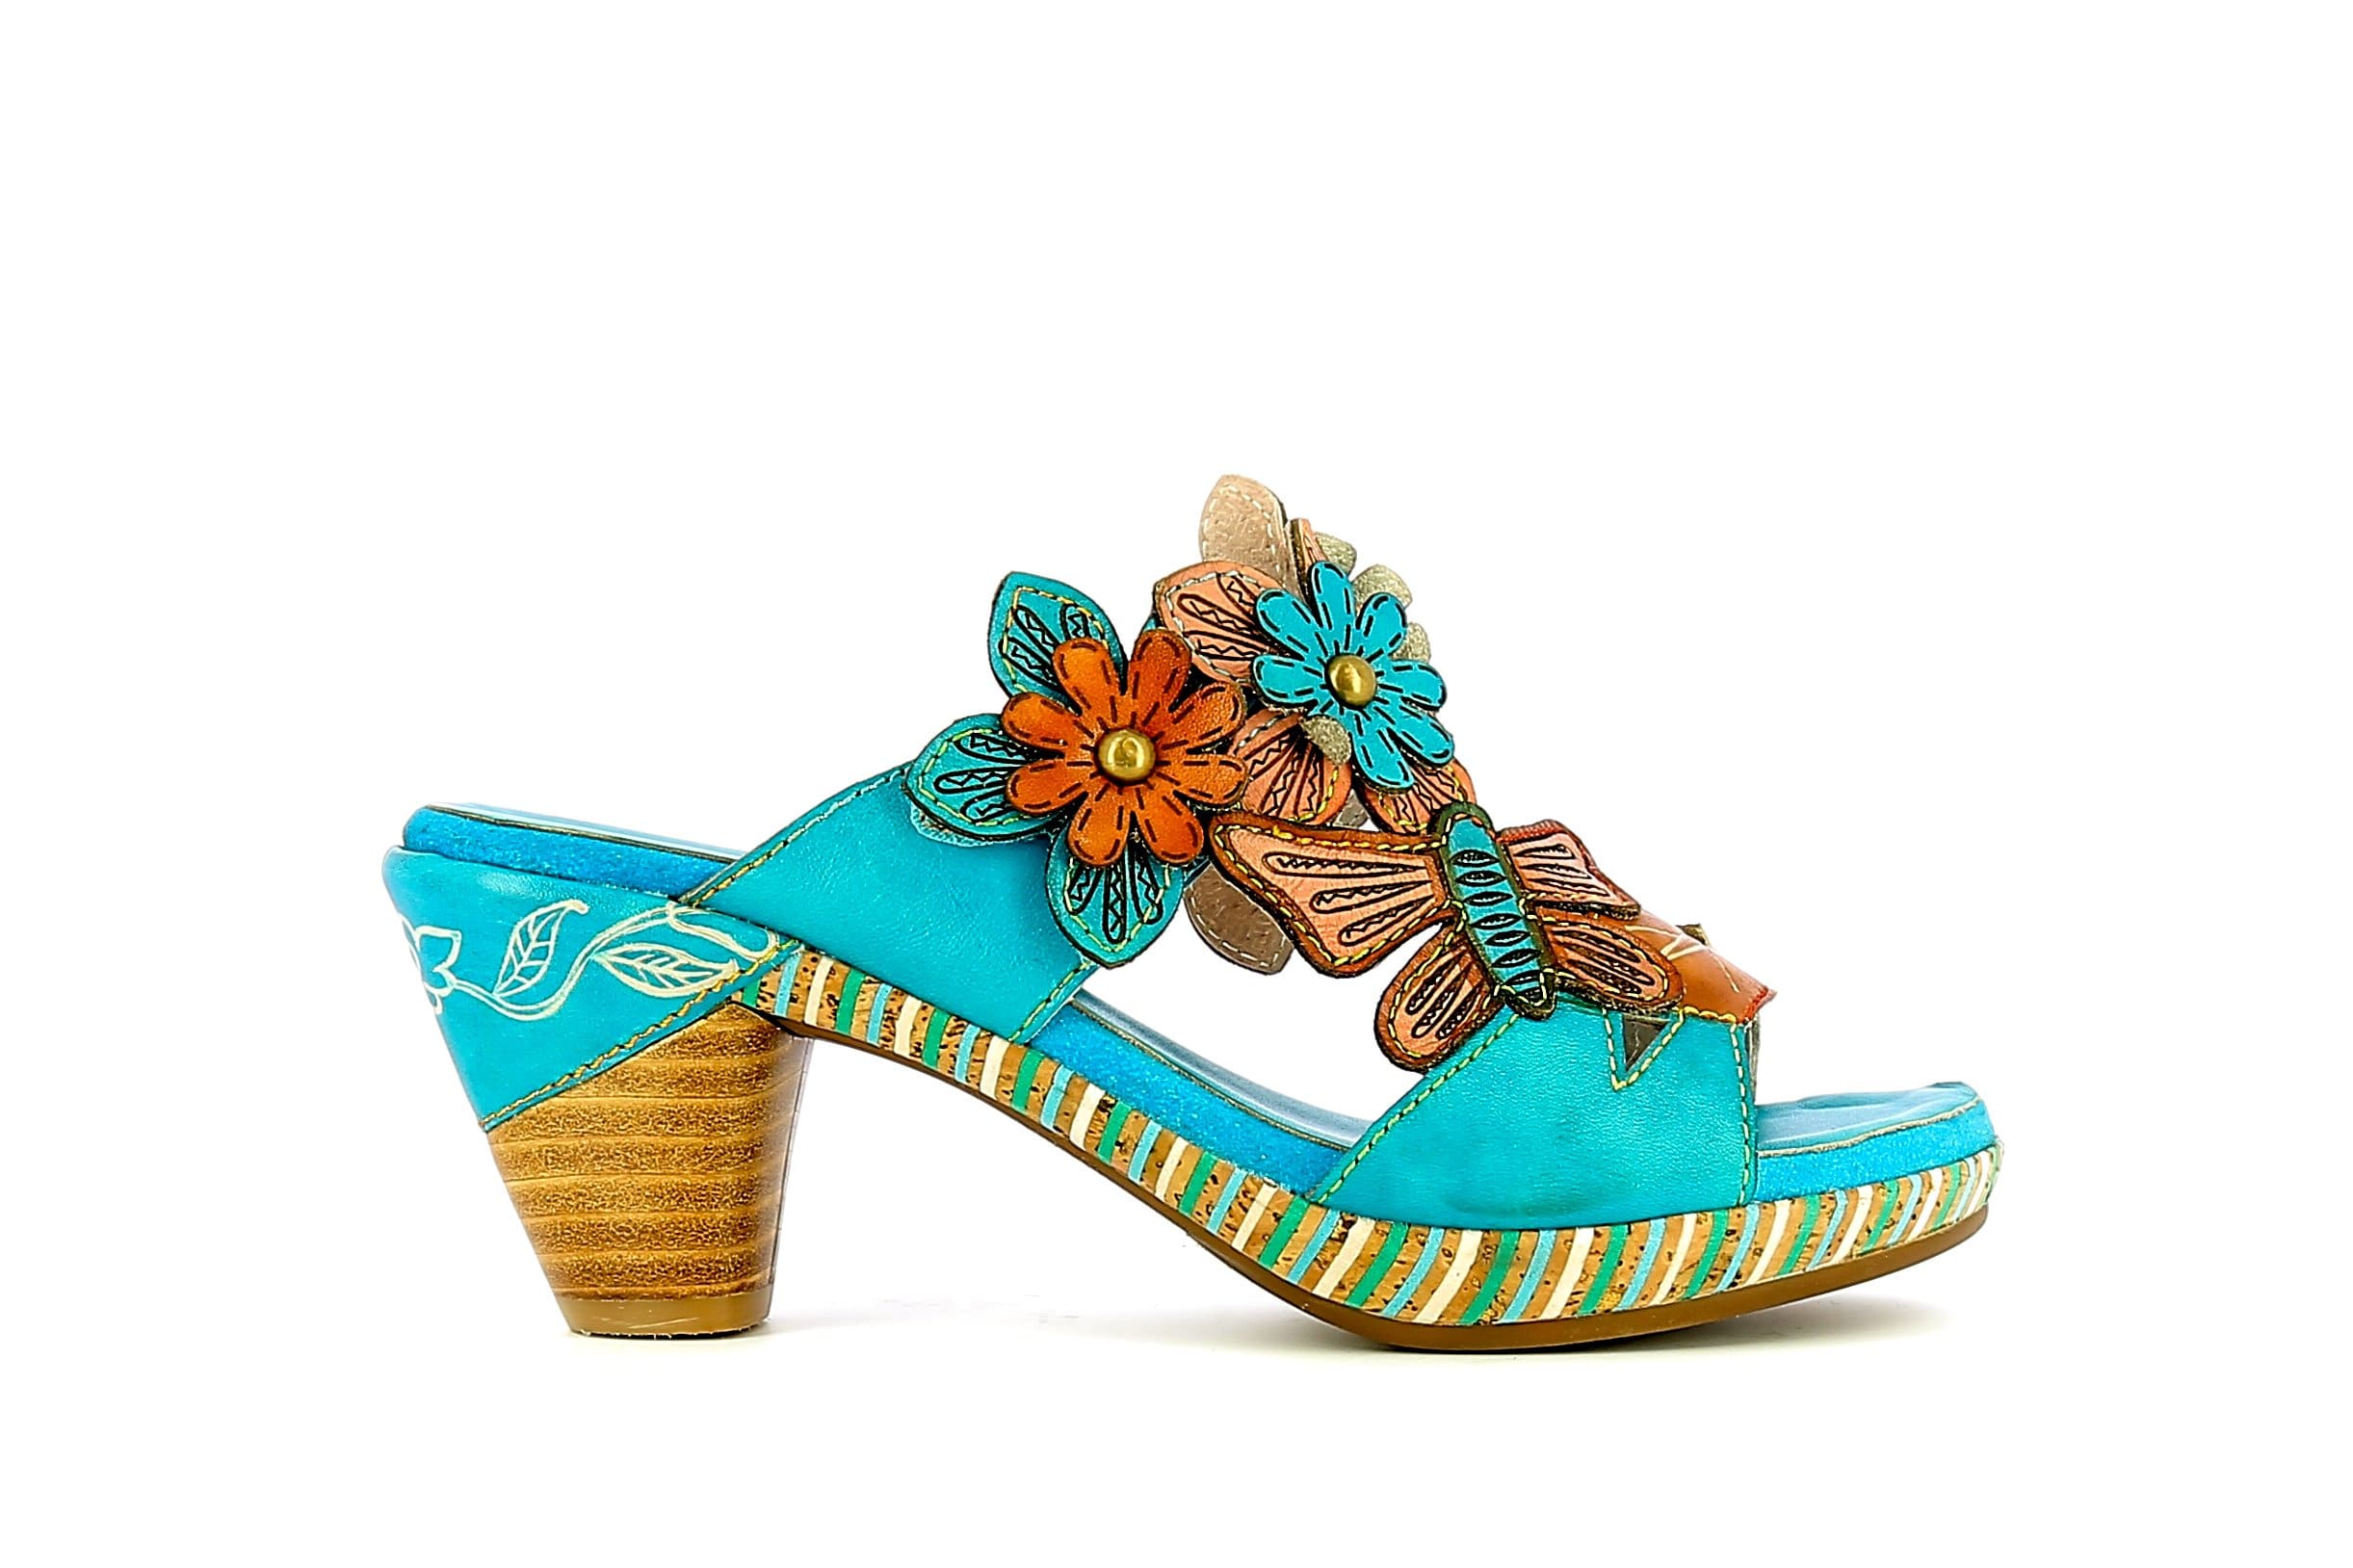 Chaussures BECLFORTO 21 - 35 / TURQUOISE - Mule